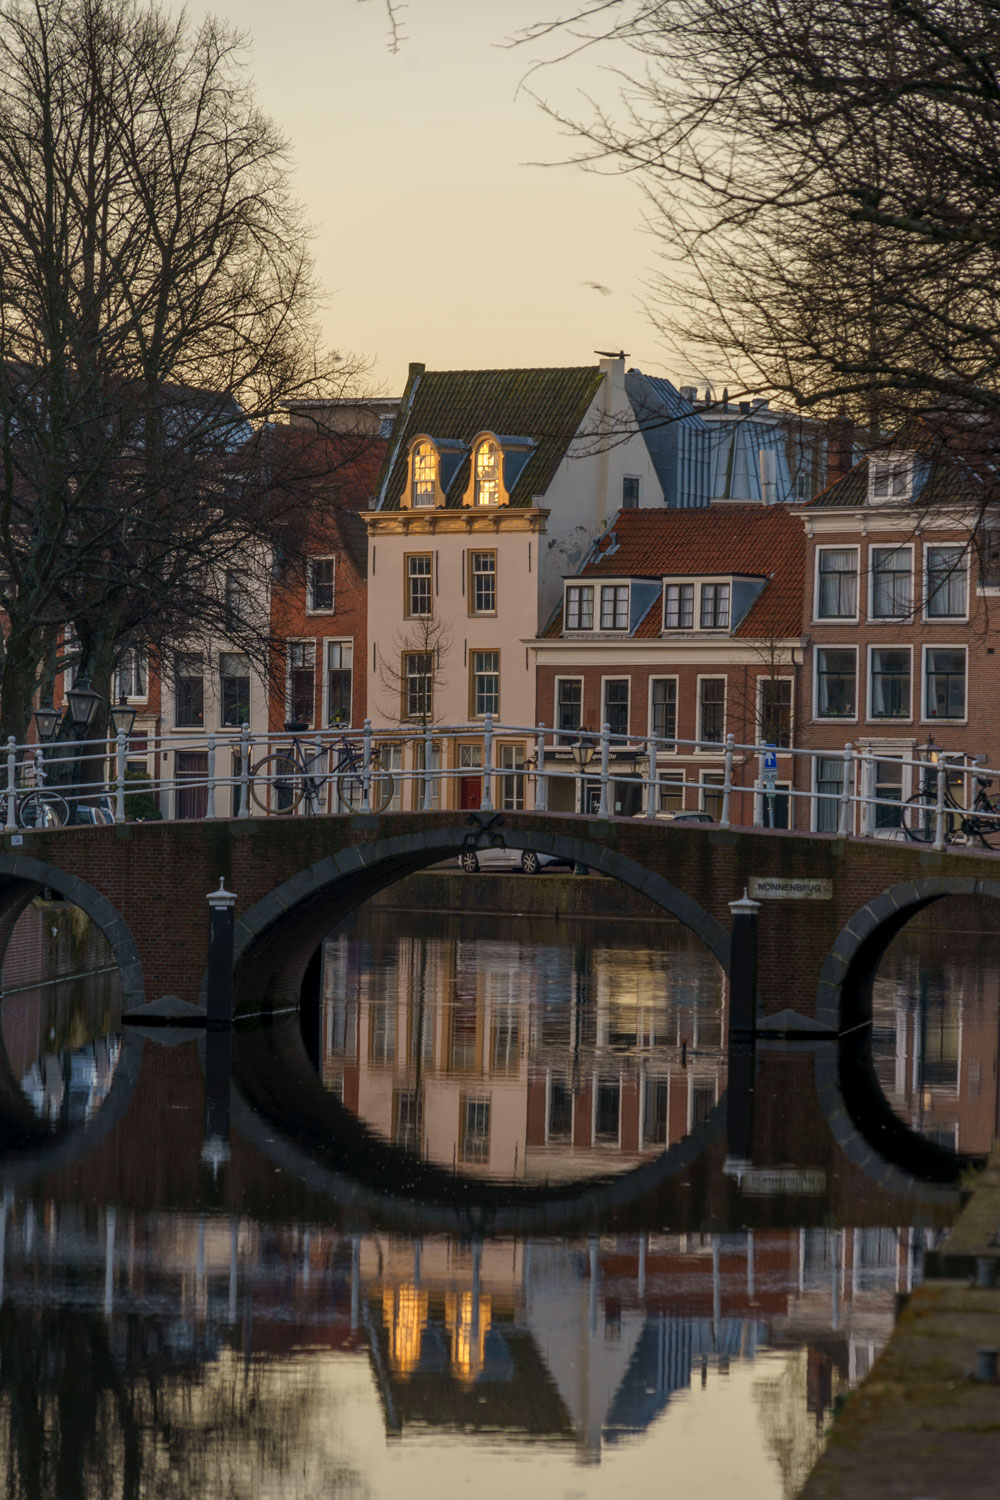 guided photography tour of Leiden